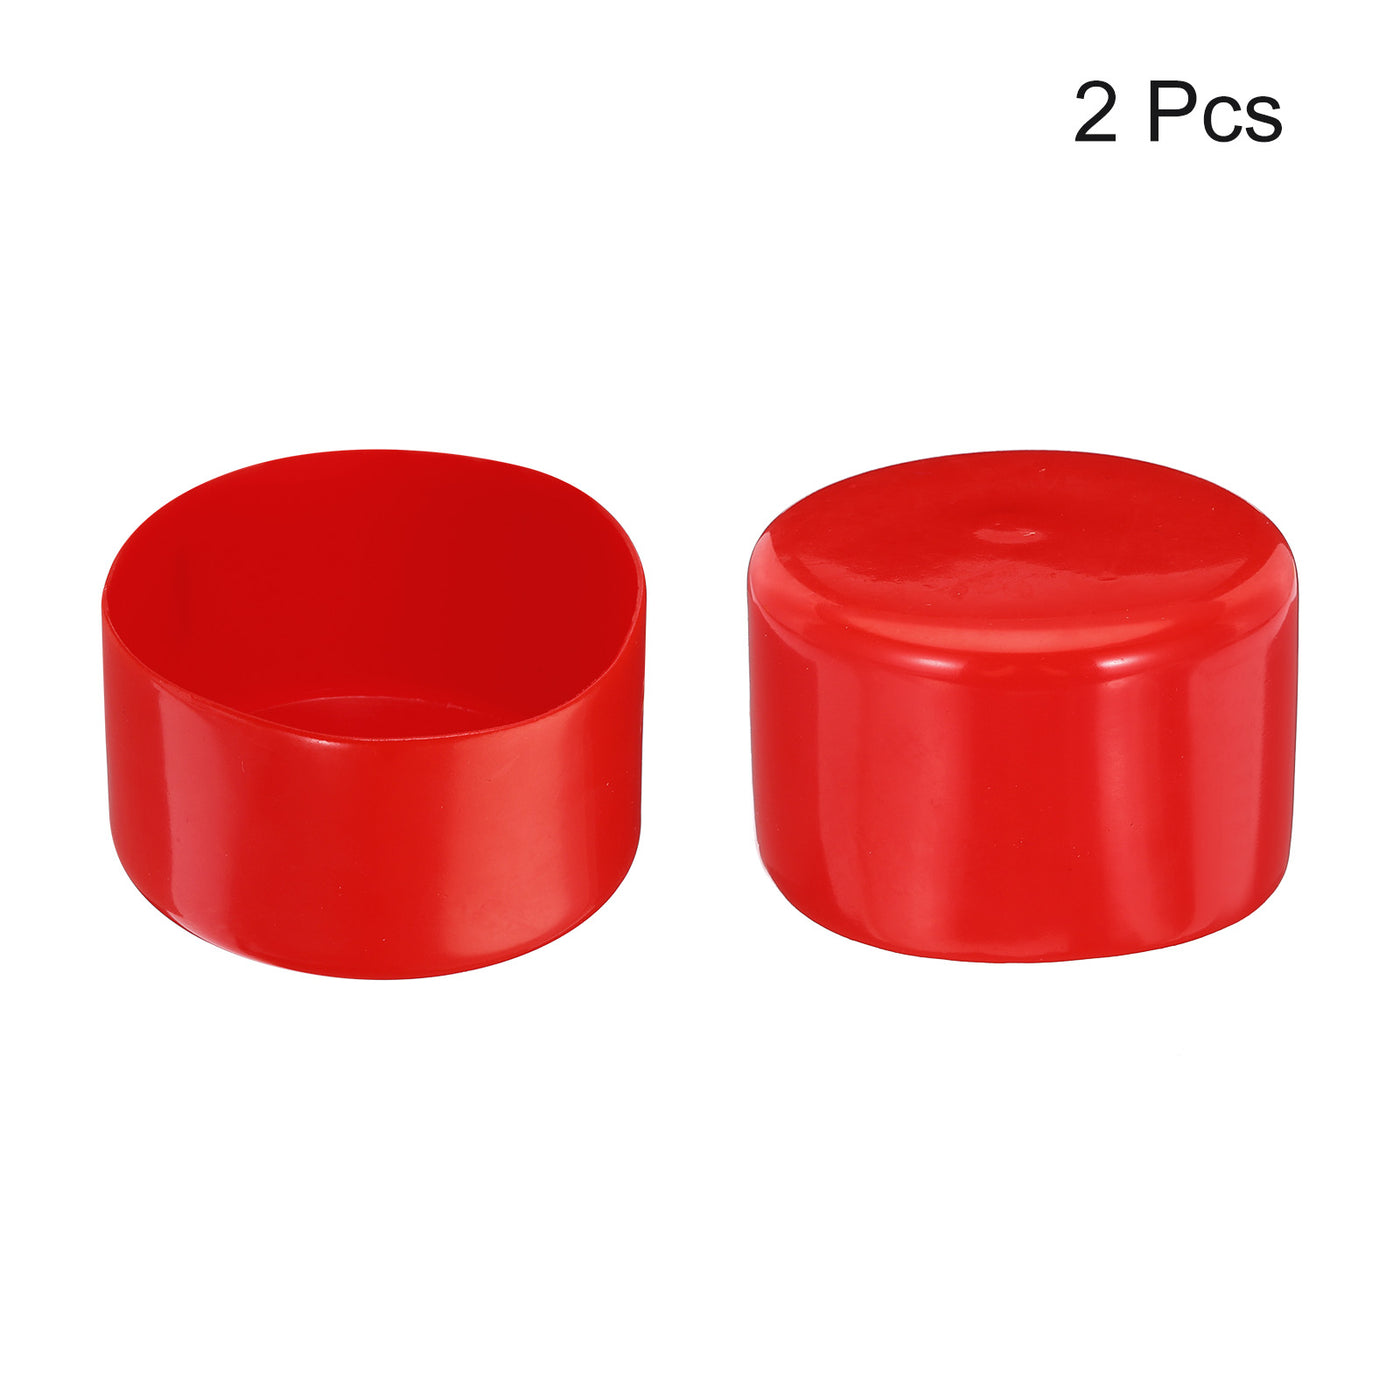 uxcell Uxcell 2pcs Rubber End Caps 85mm ID Vinyl Round Tube Bolt Cap Cover Screw Thread Protectors Red